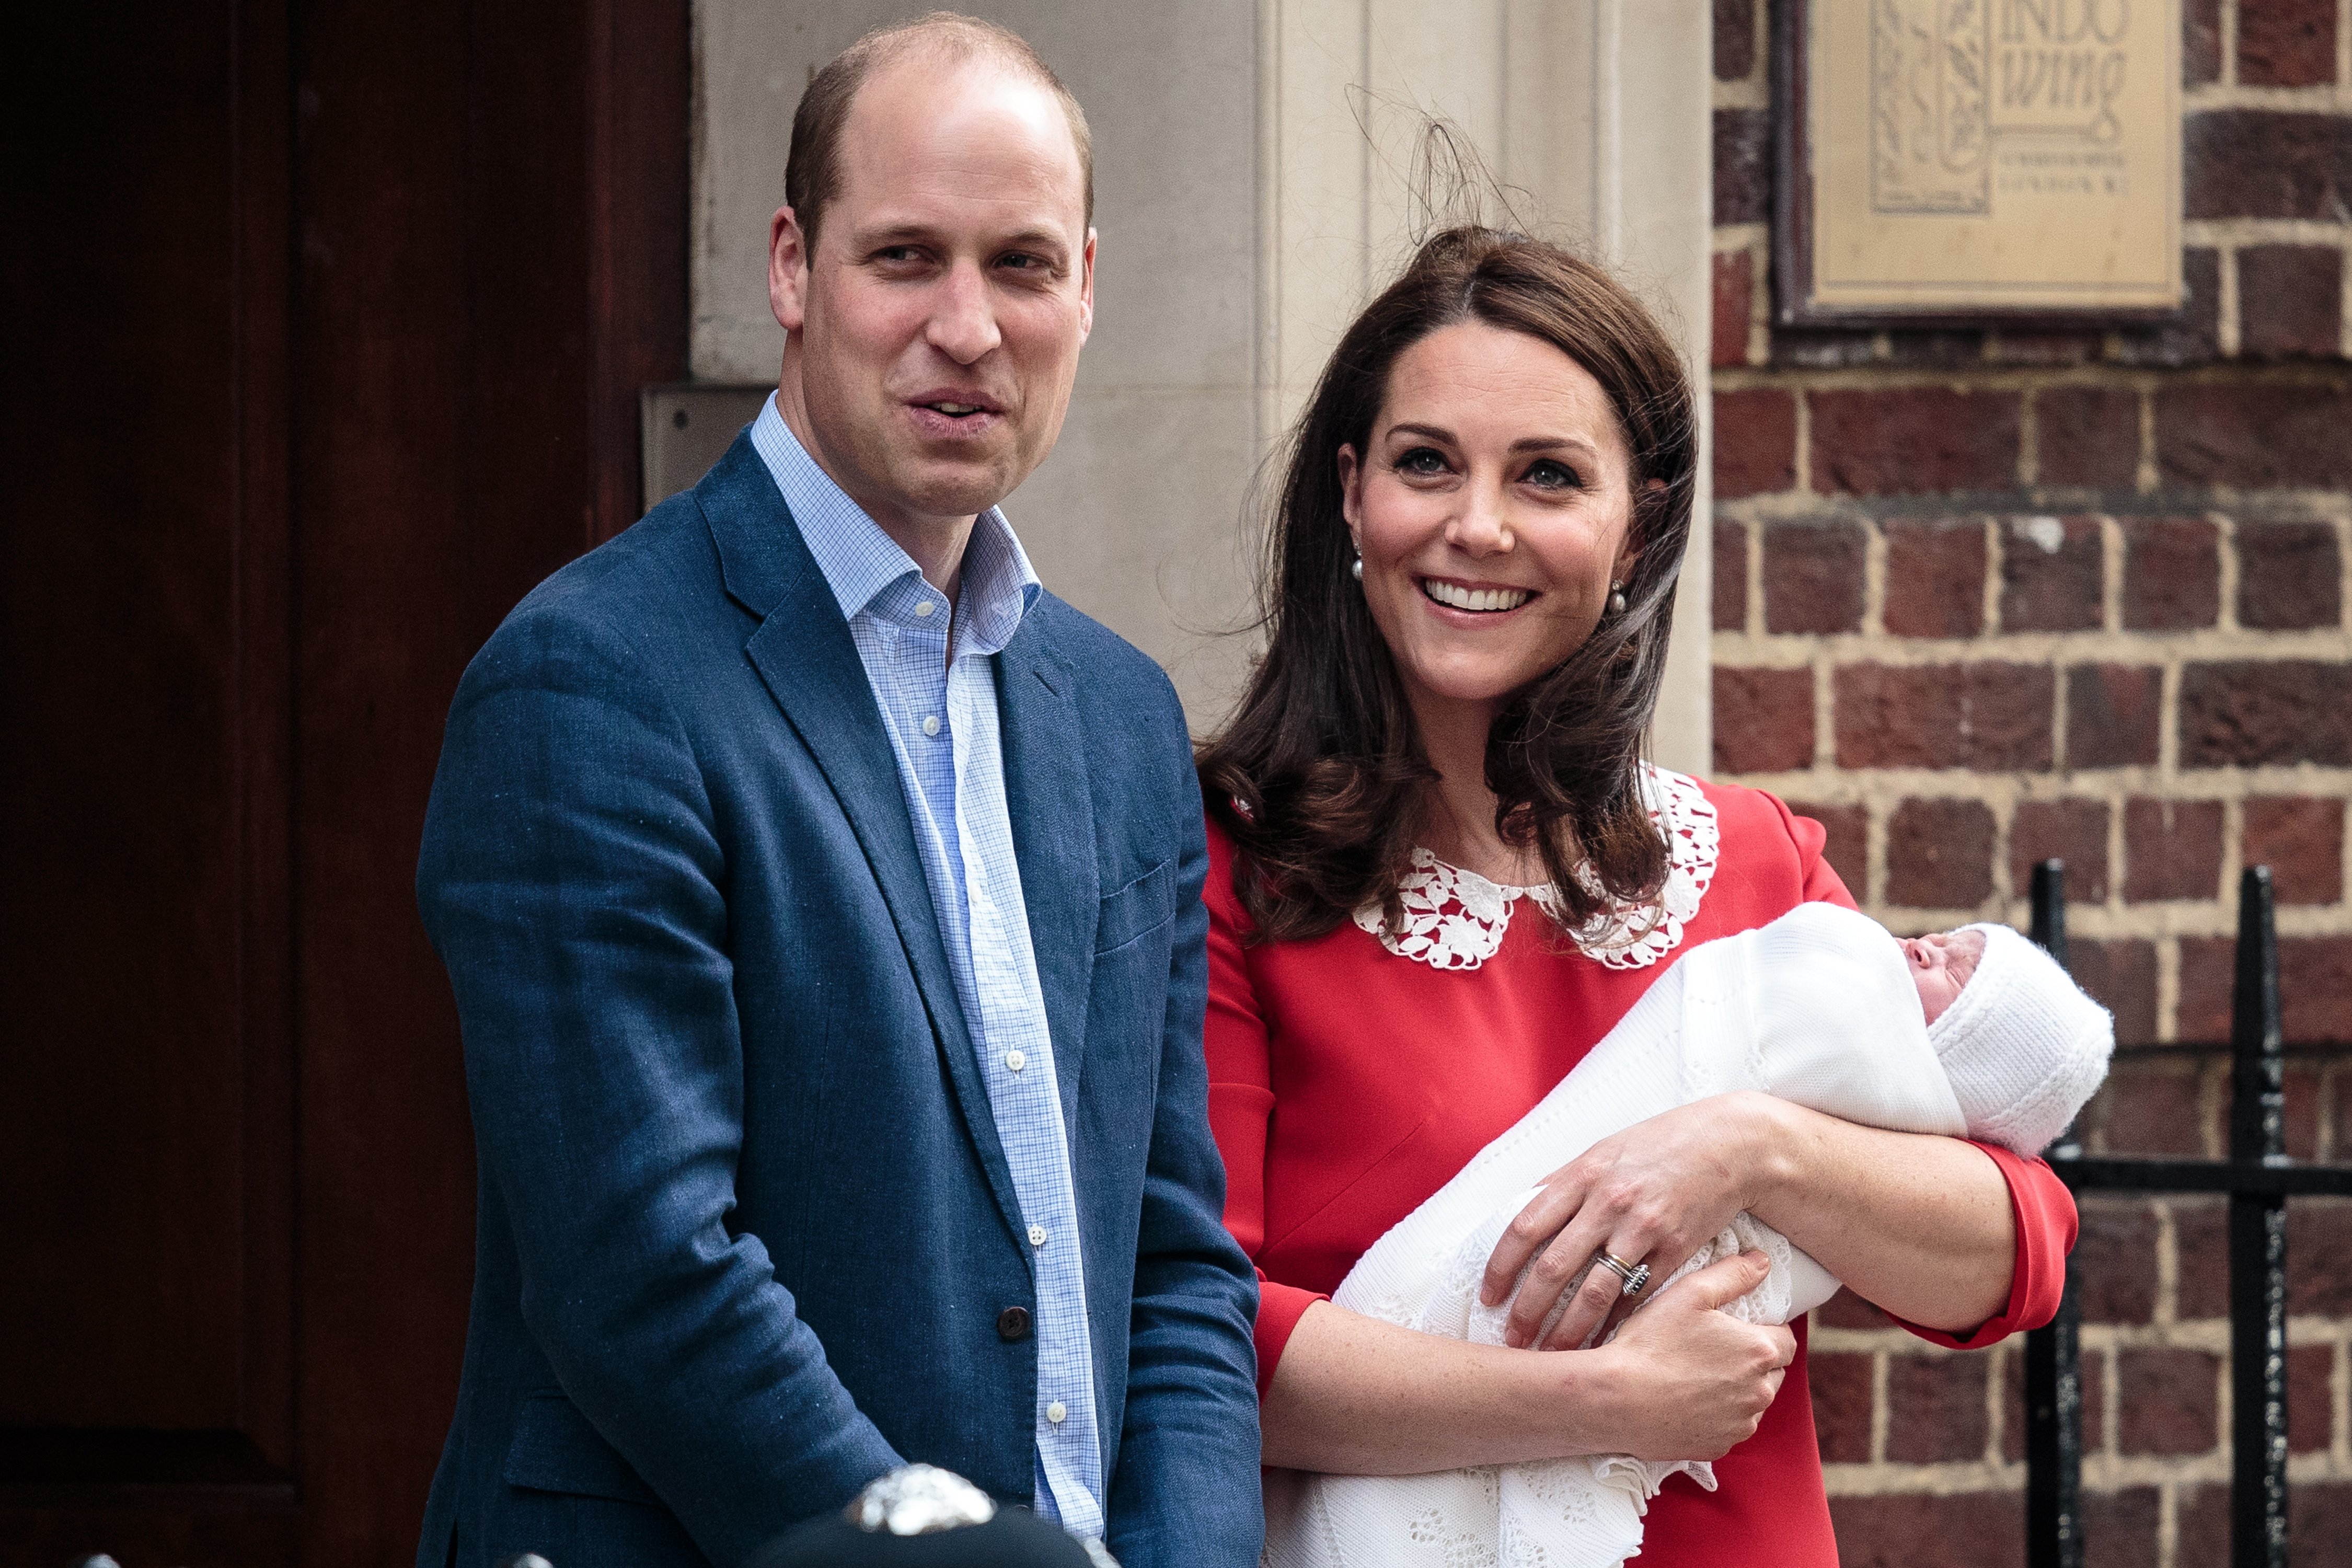 Prince William, Duke of Cambridge and Catherine, Duchess of Cambridge, during a photocall with their newborn baby boy Prince Louis of Cambridge outside the Lindo Wing of St Mary's Hospital on April 23, 2018 in London, England. / Source: Getty Images